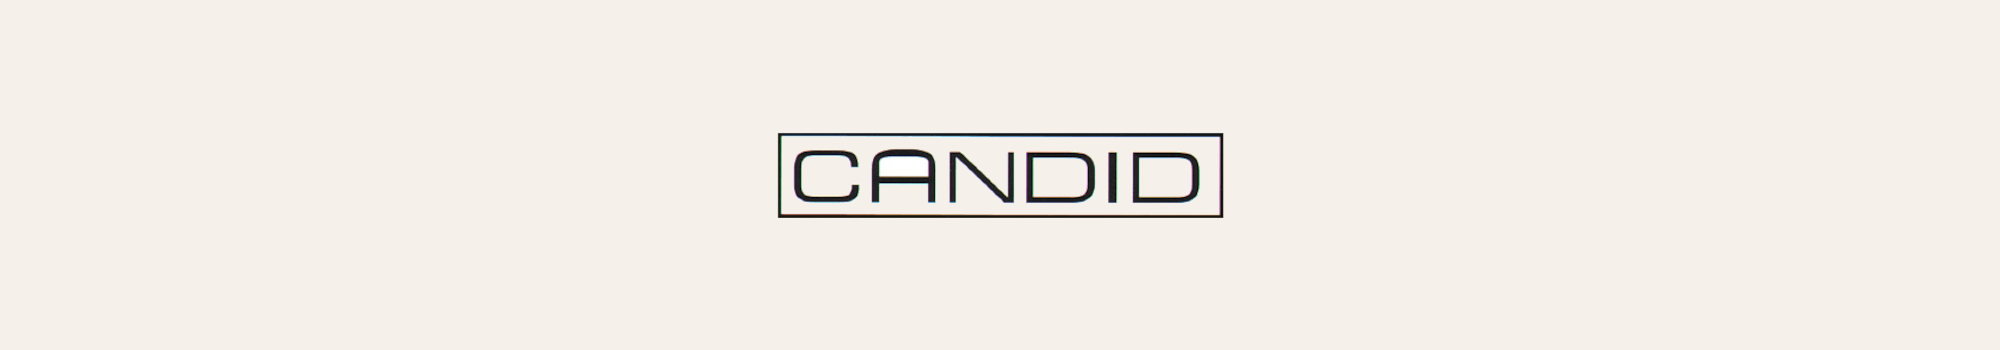 Candid Records